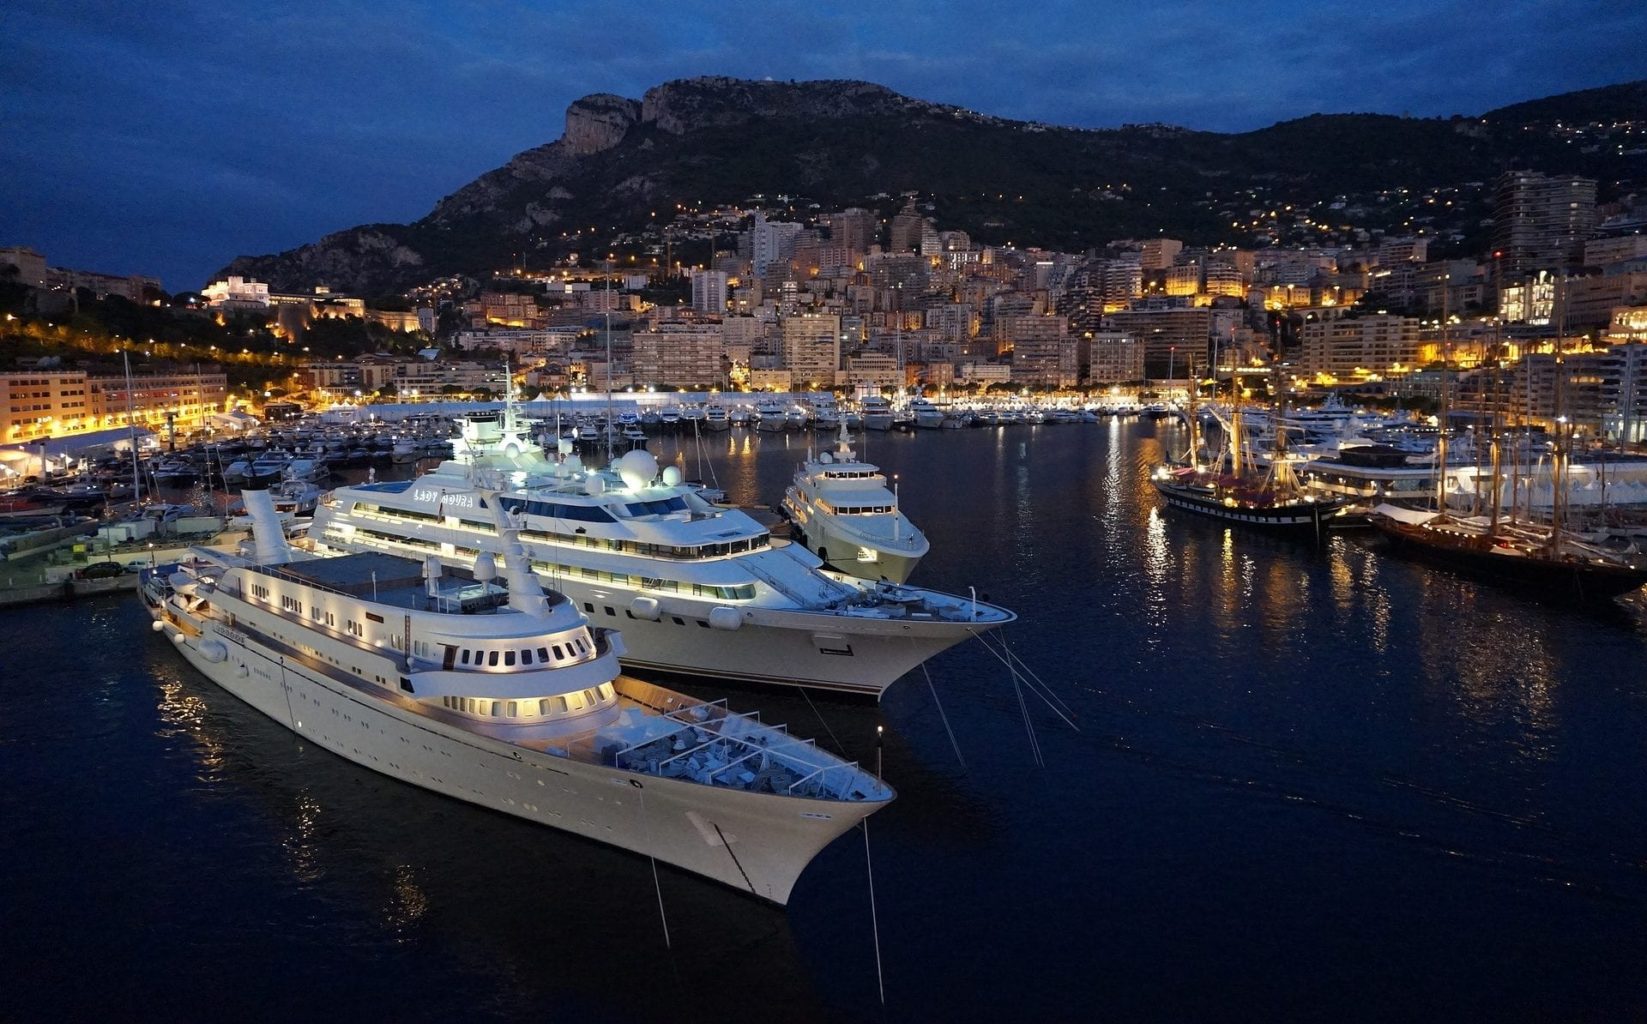 Yachts displayed at night at the harbour of Monaco